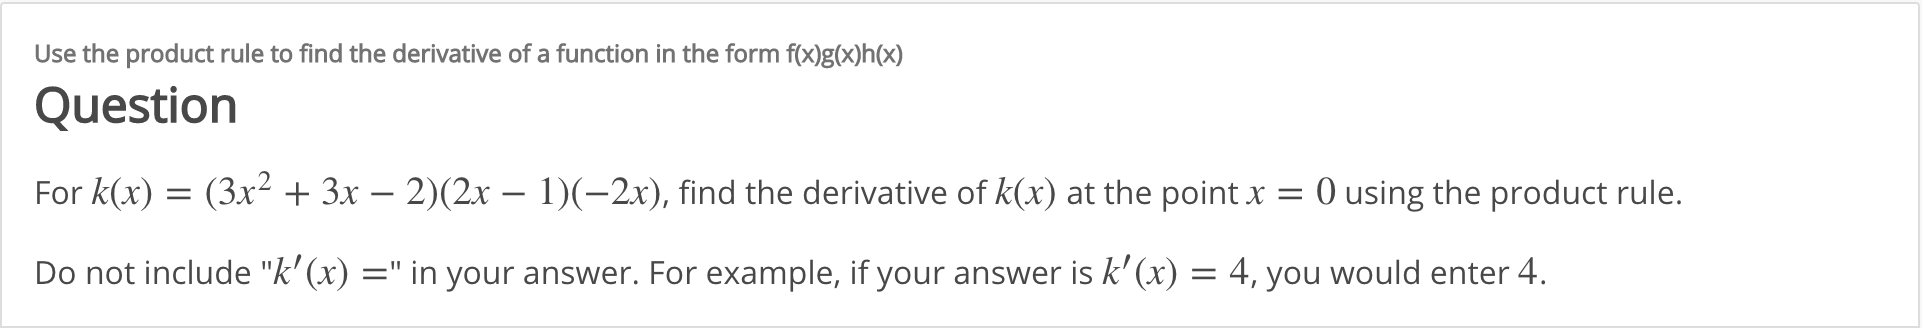 Use the product rule to find the derivative of a function in the form f(x)g(x)h(x)
Question
For k(x) = (3x² + 3x – 2)(2x – 1)(-2x), find the derivative of k(x) at the point x = 0 using the product rule.
Do not include "k' (x) =" in your answer. For example, if your answer is k'(x) = 4, you would enter 4.
